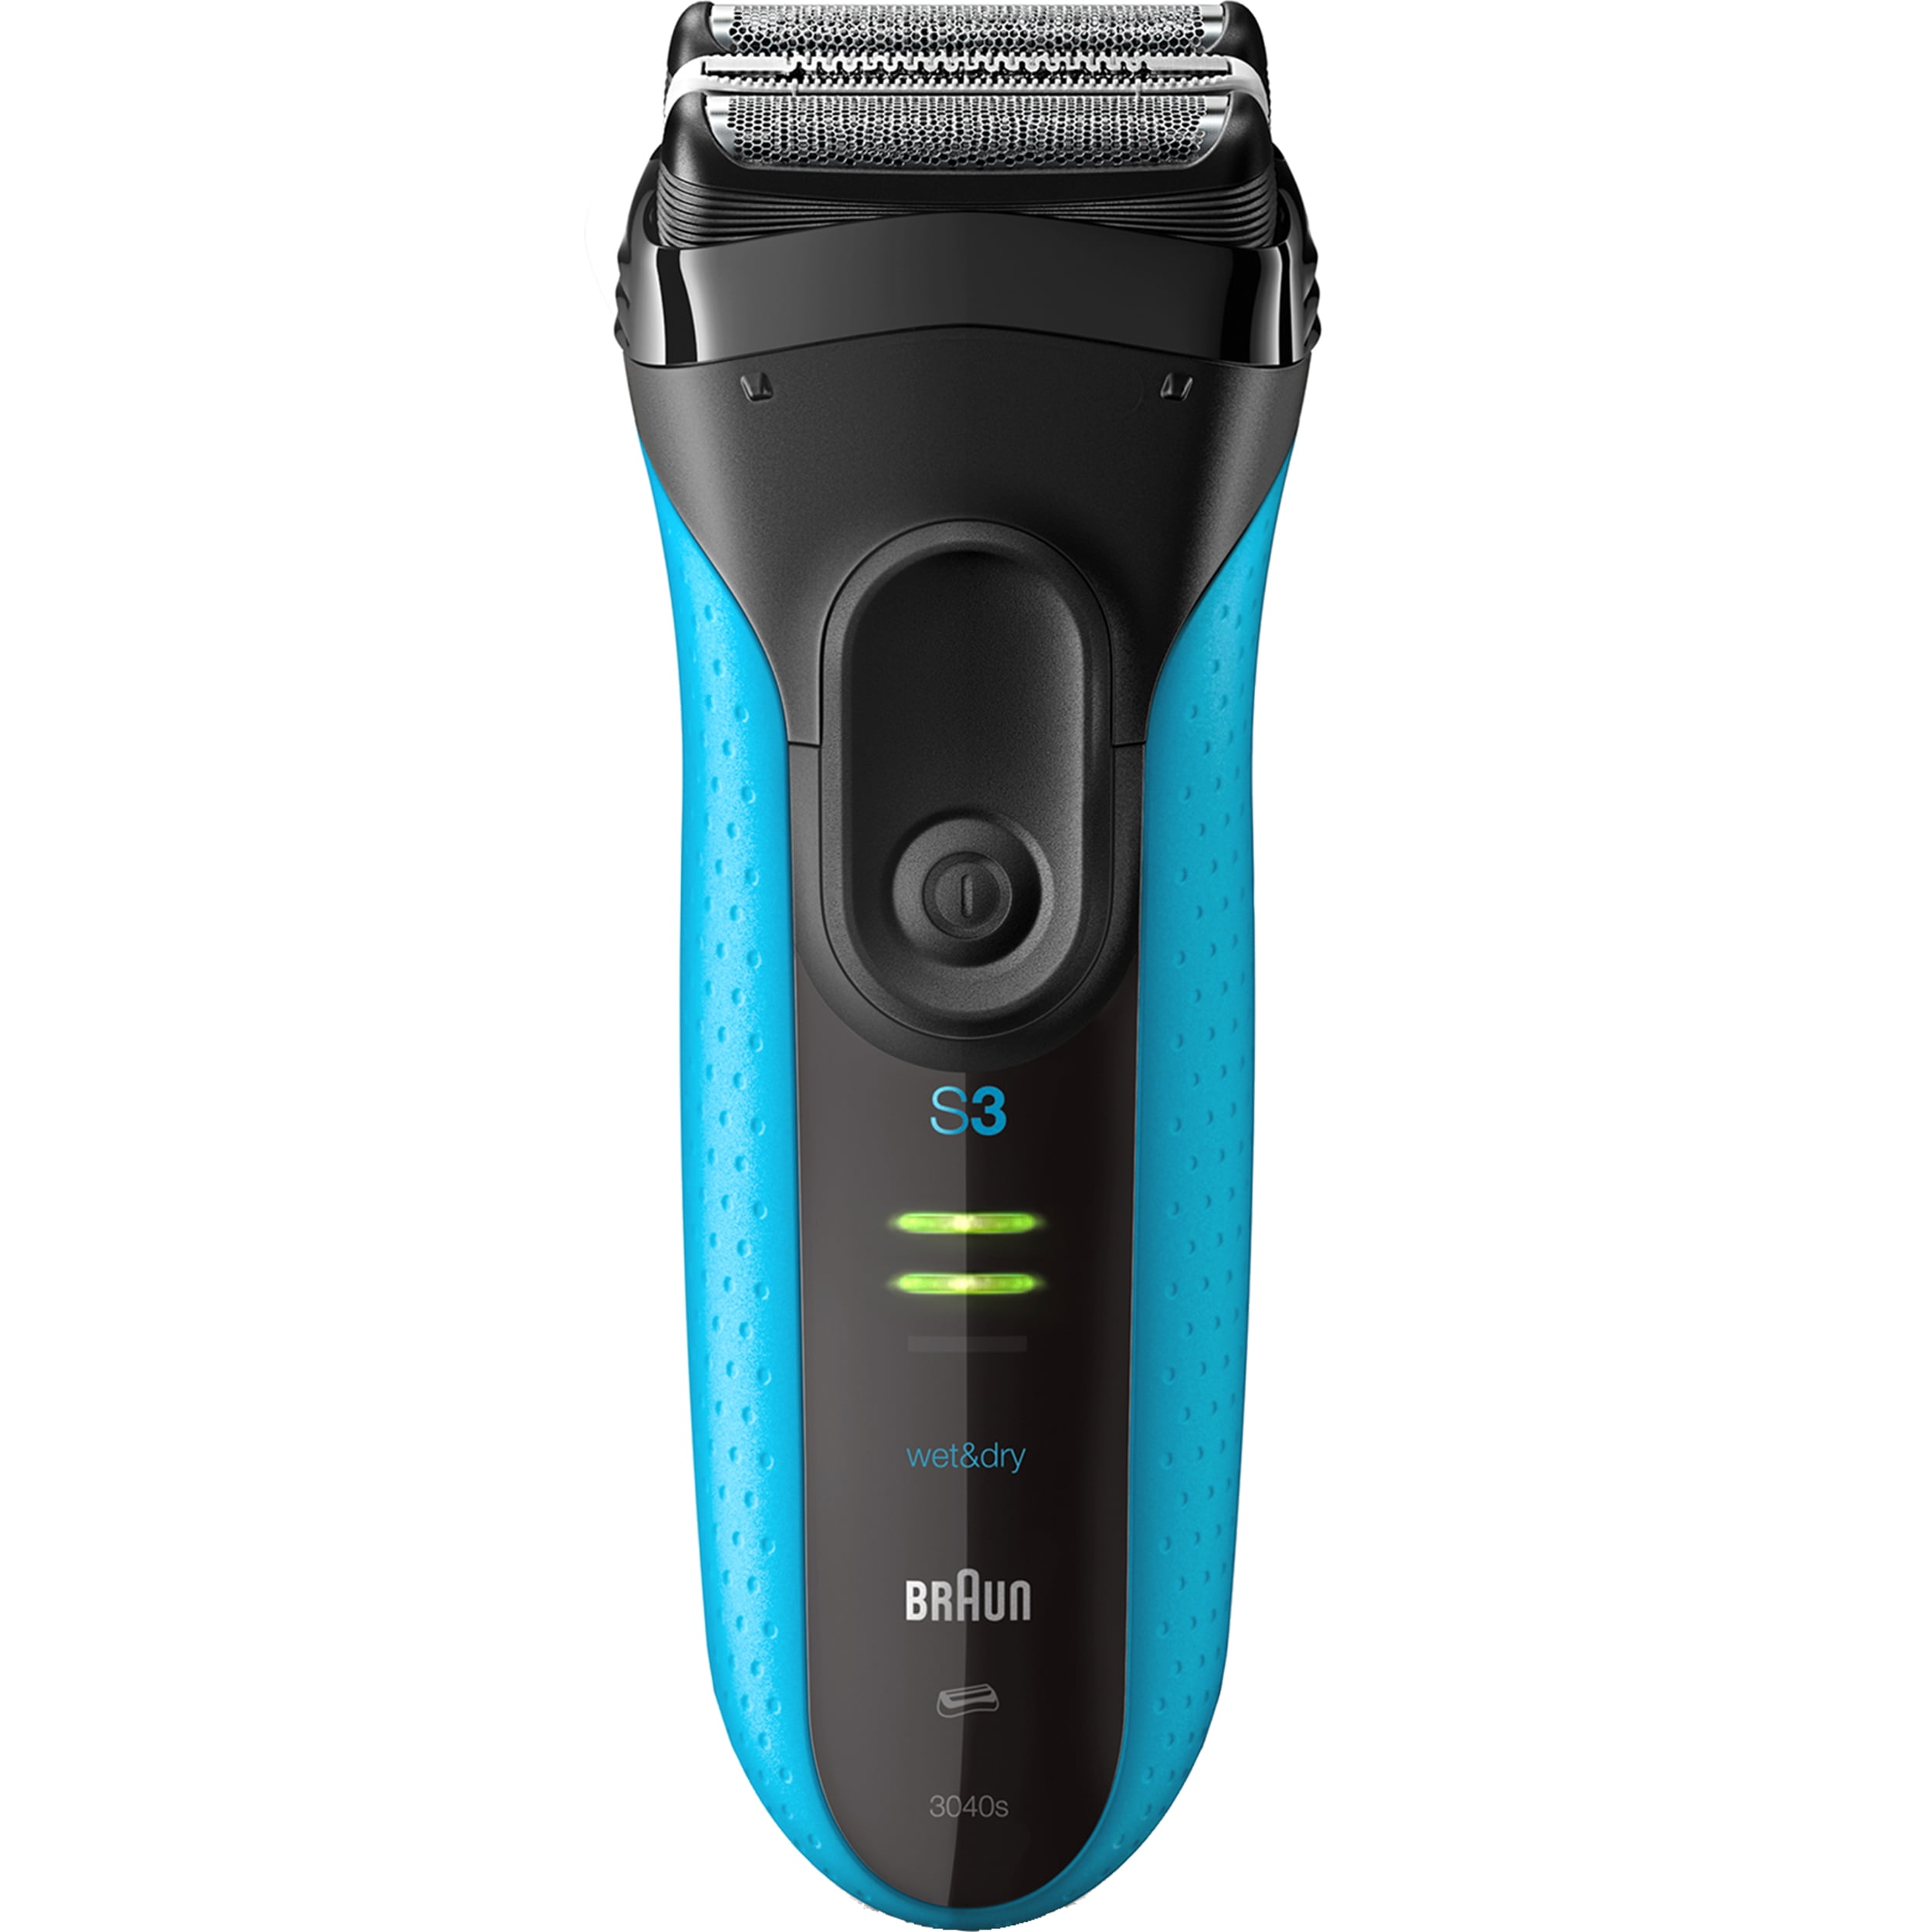 Braun Series 3 ProSkin 3010s Wet Dry Electric Shaver